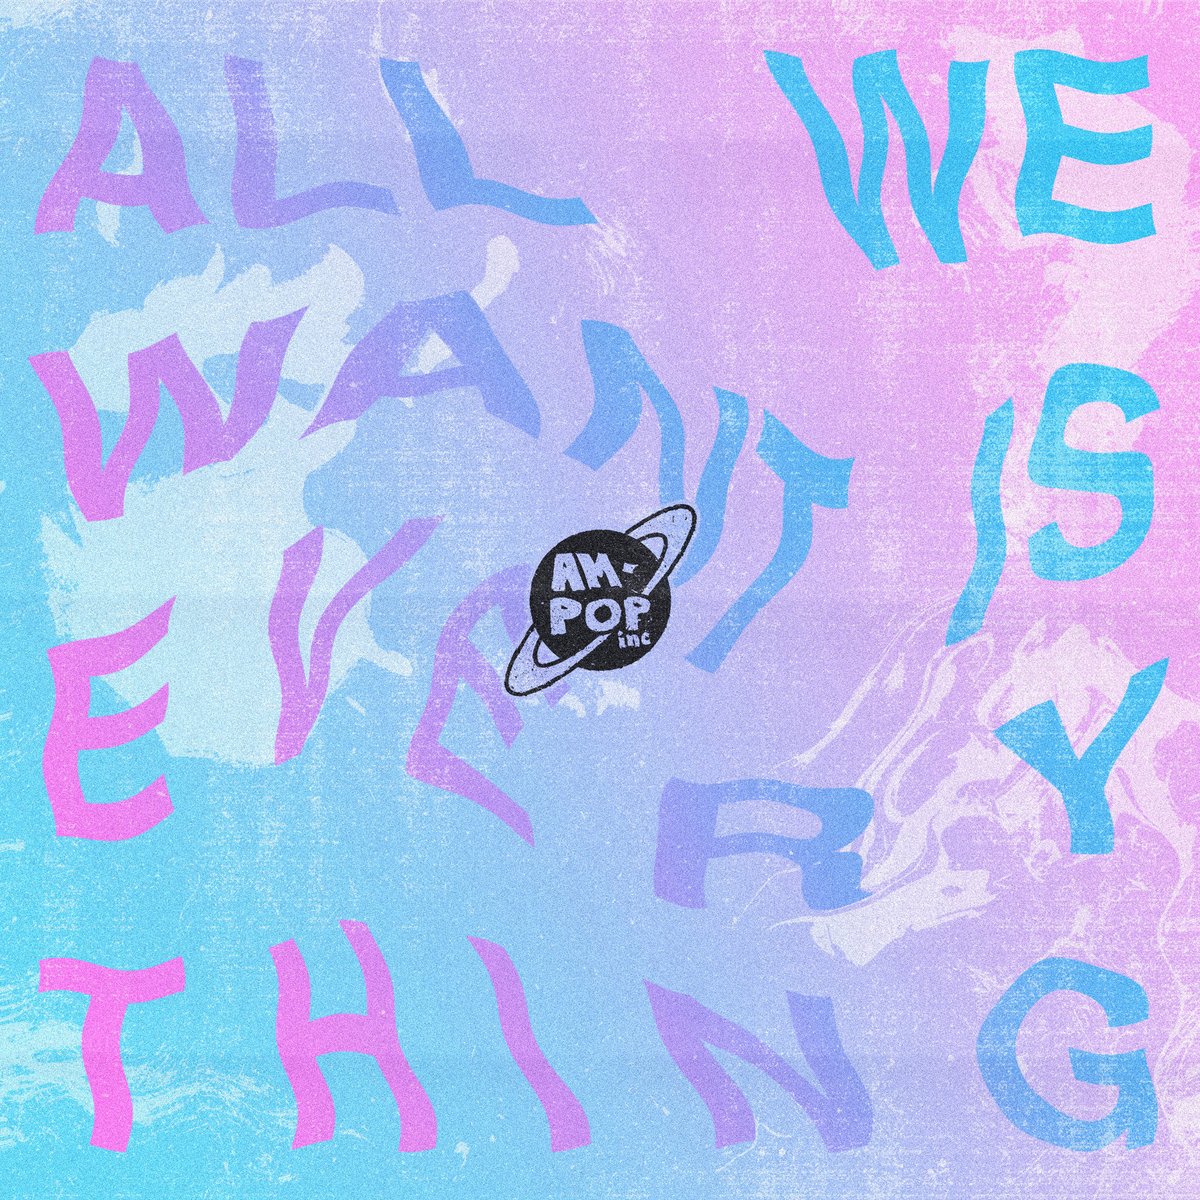 now on all the major streaming services: “All We Want Is Everything”, a compilation featuring brand-new music from @kermesforever @boarderband @slash_fic @sweetbellechobb and @GordianStimm 😍 check it: smarturl.it/amp011